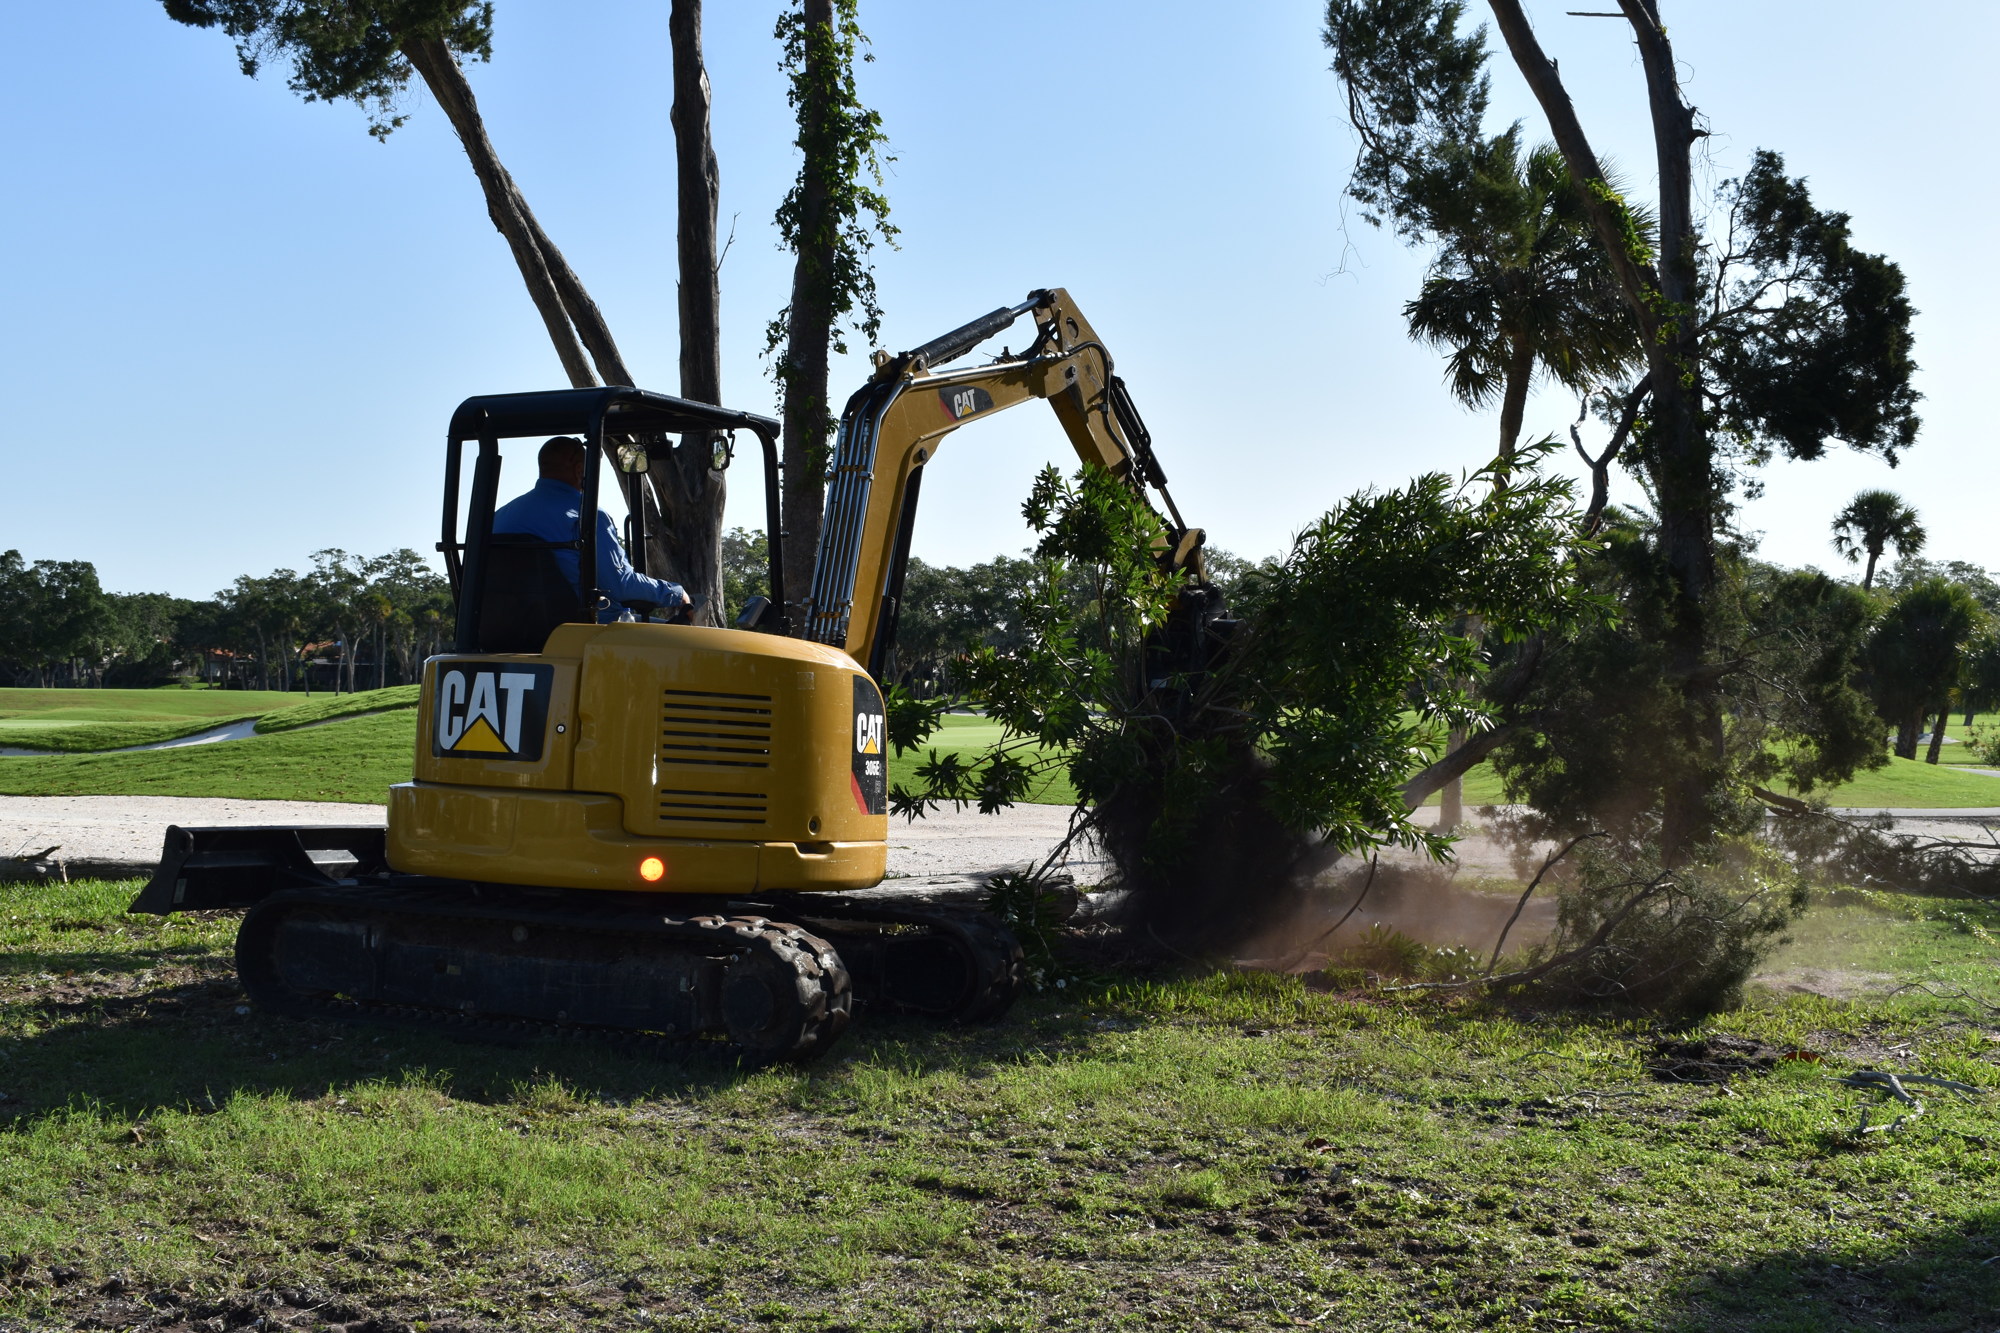 Crews cleared trees to create space for a temporary trailer just north of Station 92 at 2162 Gulf of Mexico Drive.